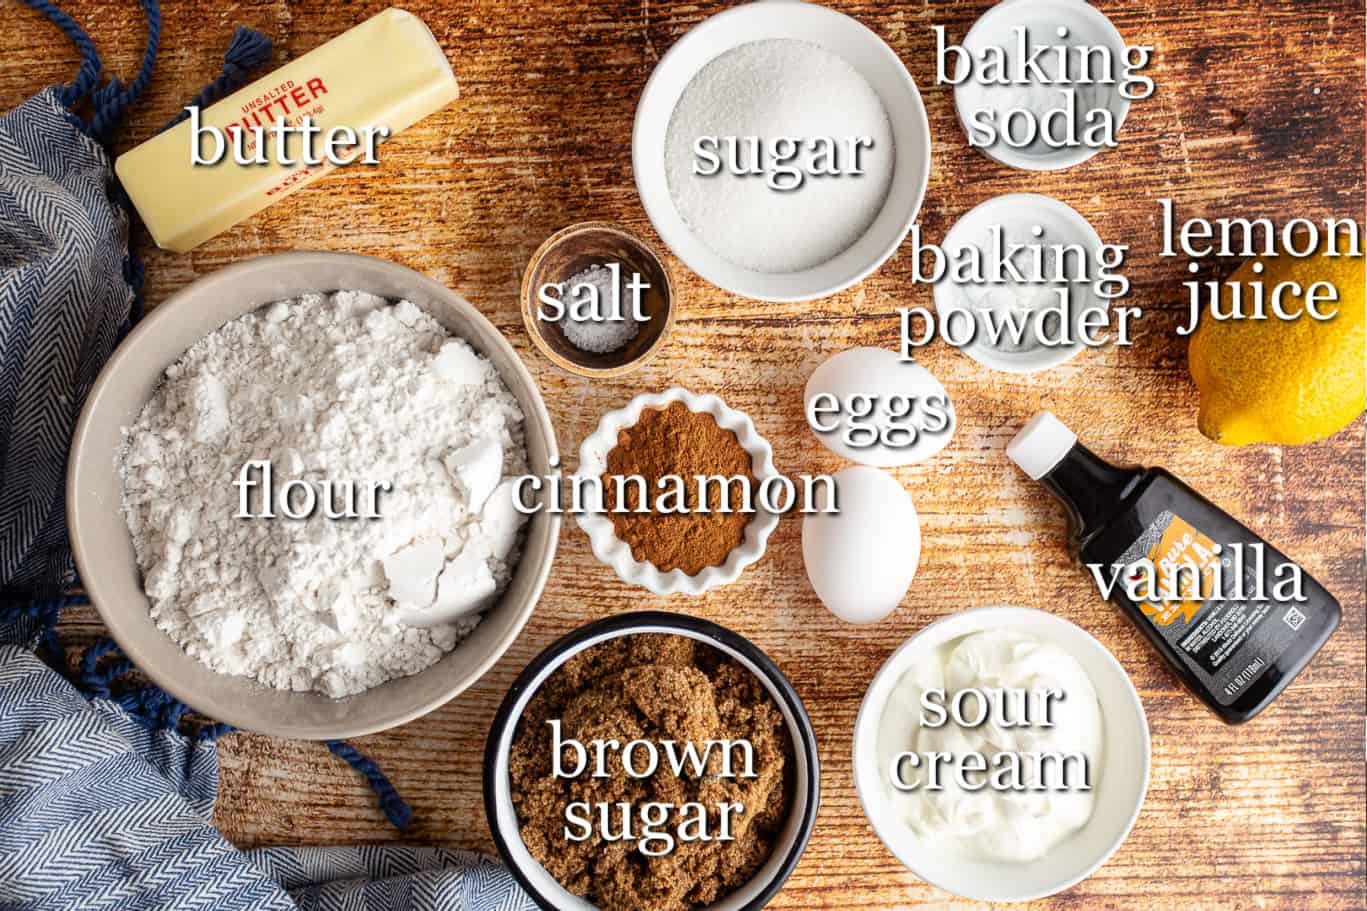 Ingredients for making cinnamon crumb cake, with text labels.